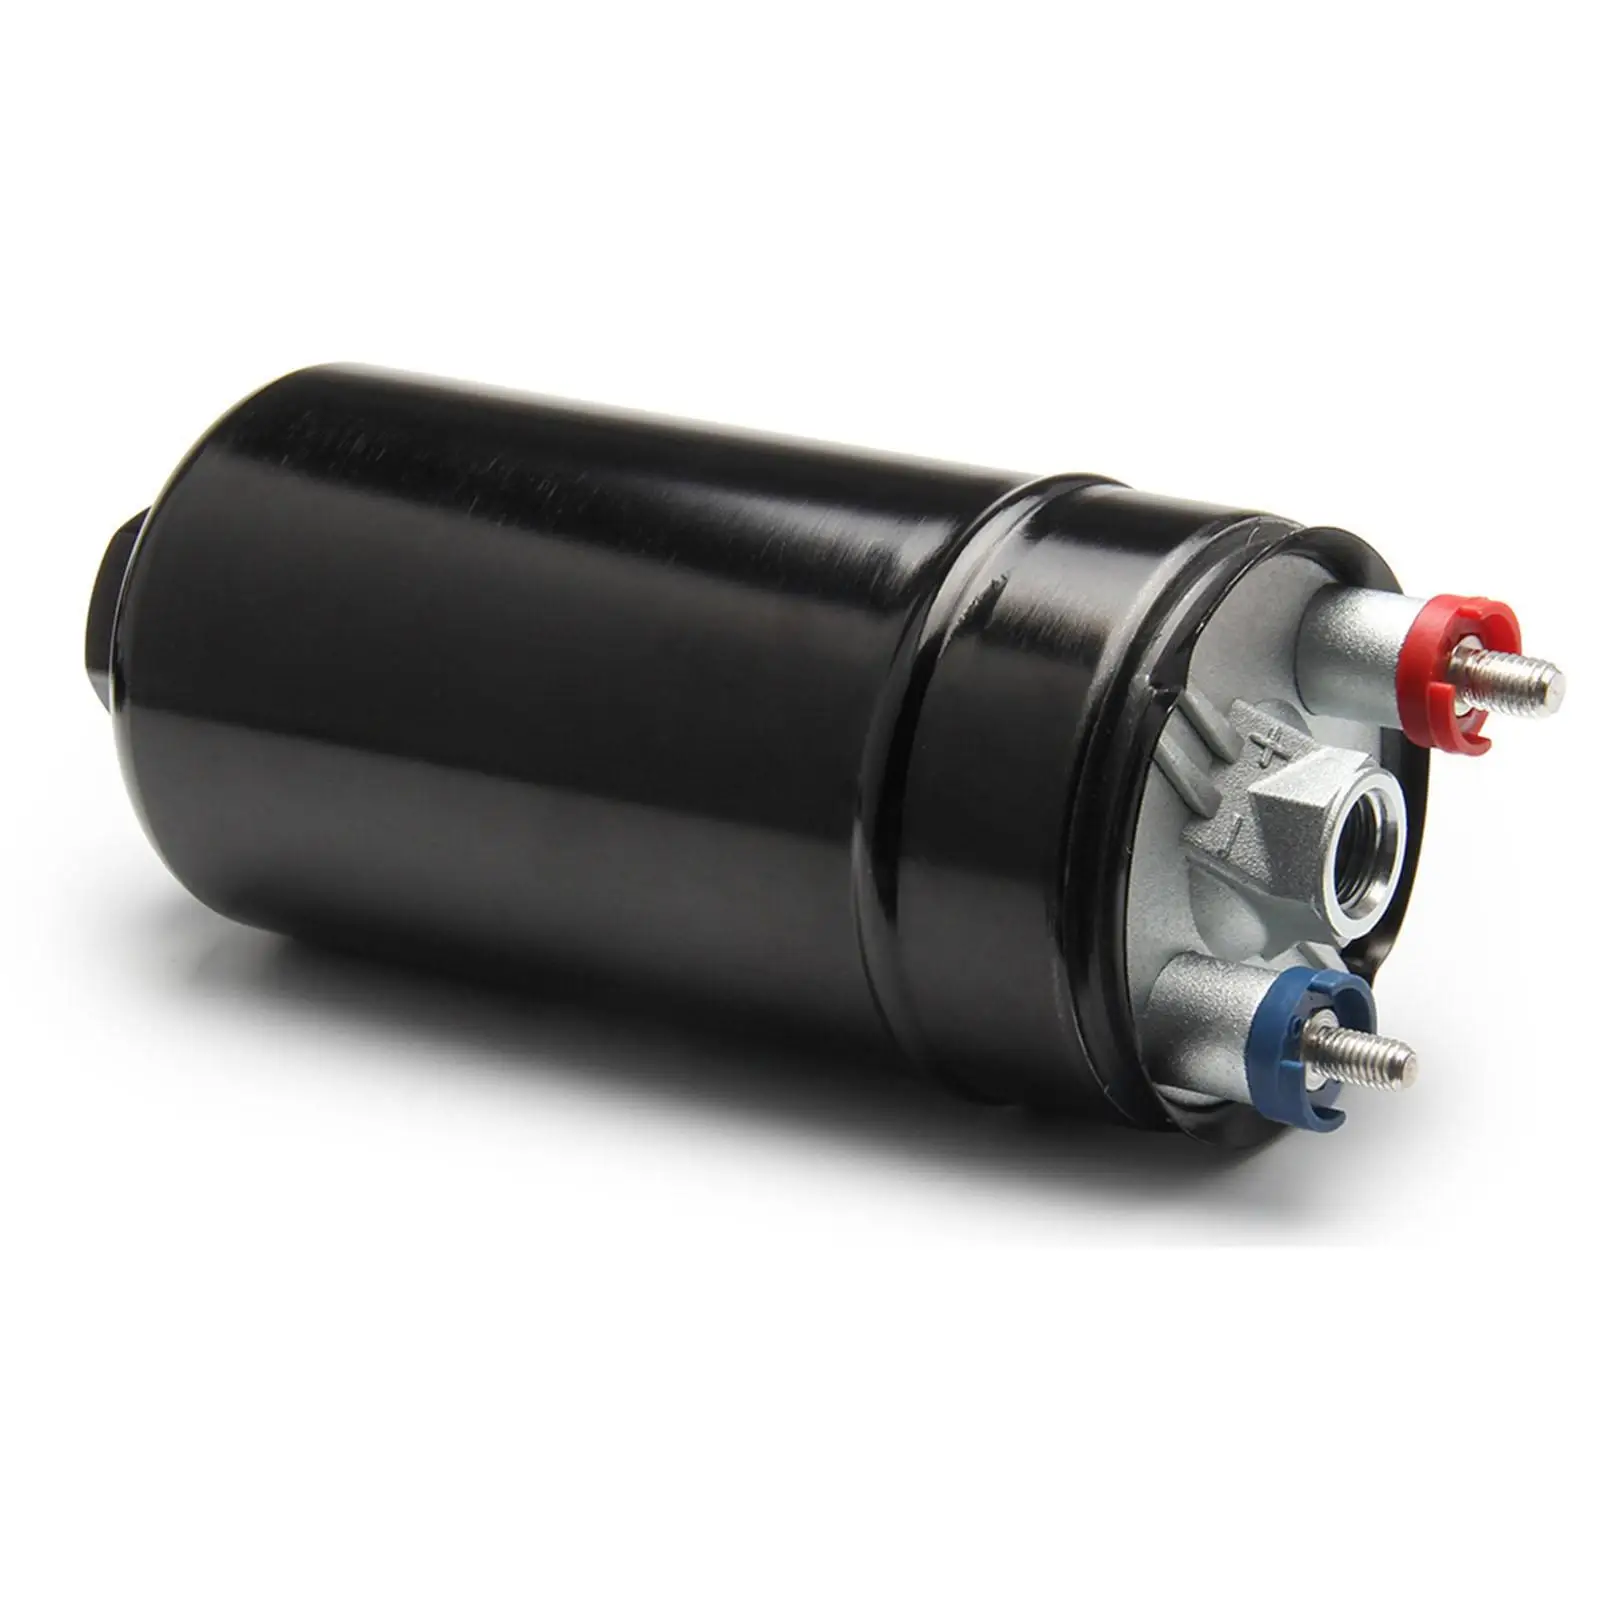 Universal External Inline Fuel Pump/ 0580254044 Replace 300Lph 2V/ for 044 85 Only for Gasoline Car.